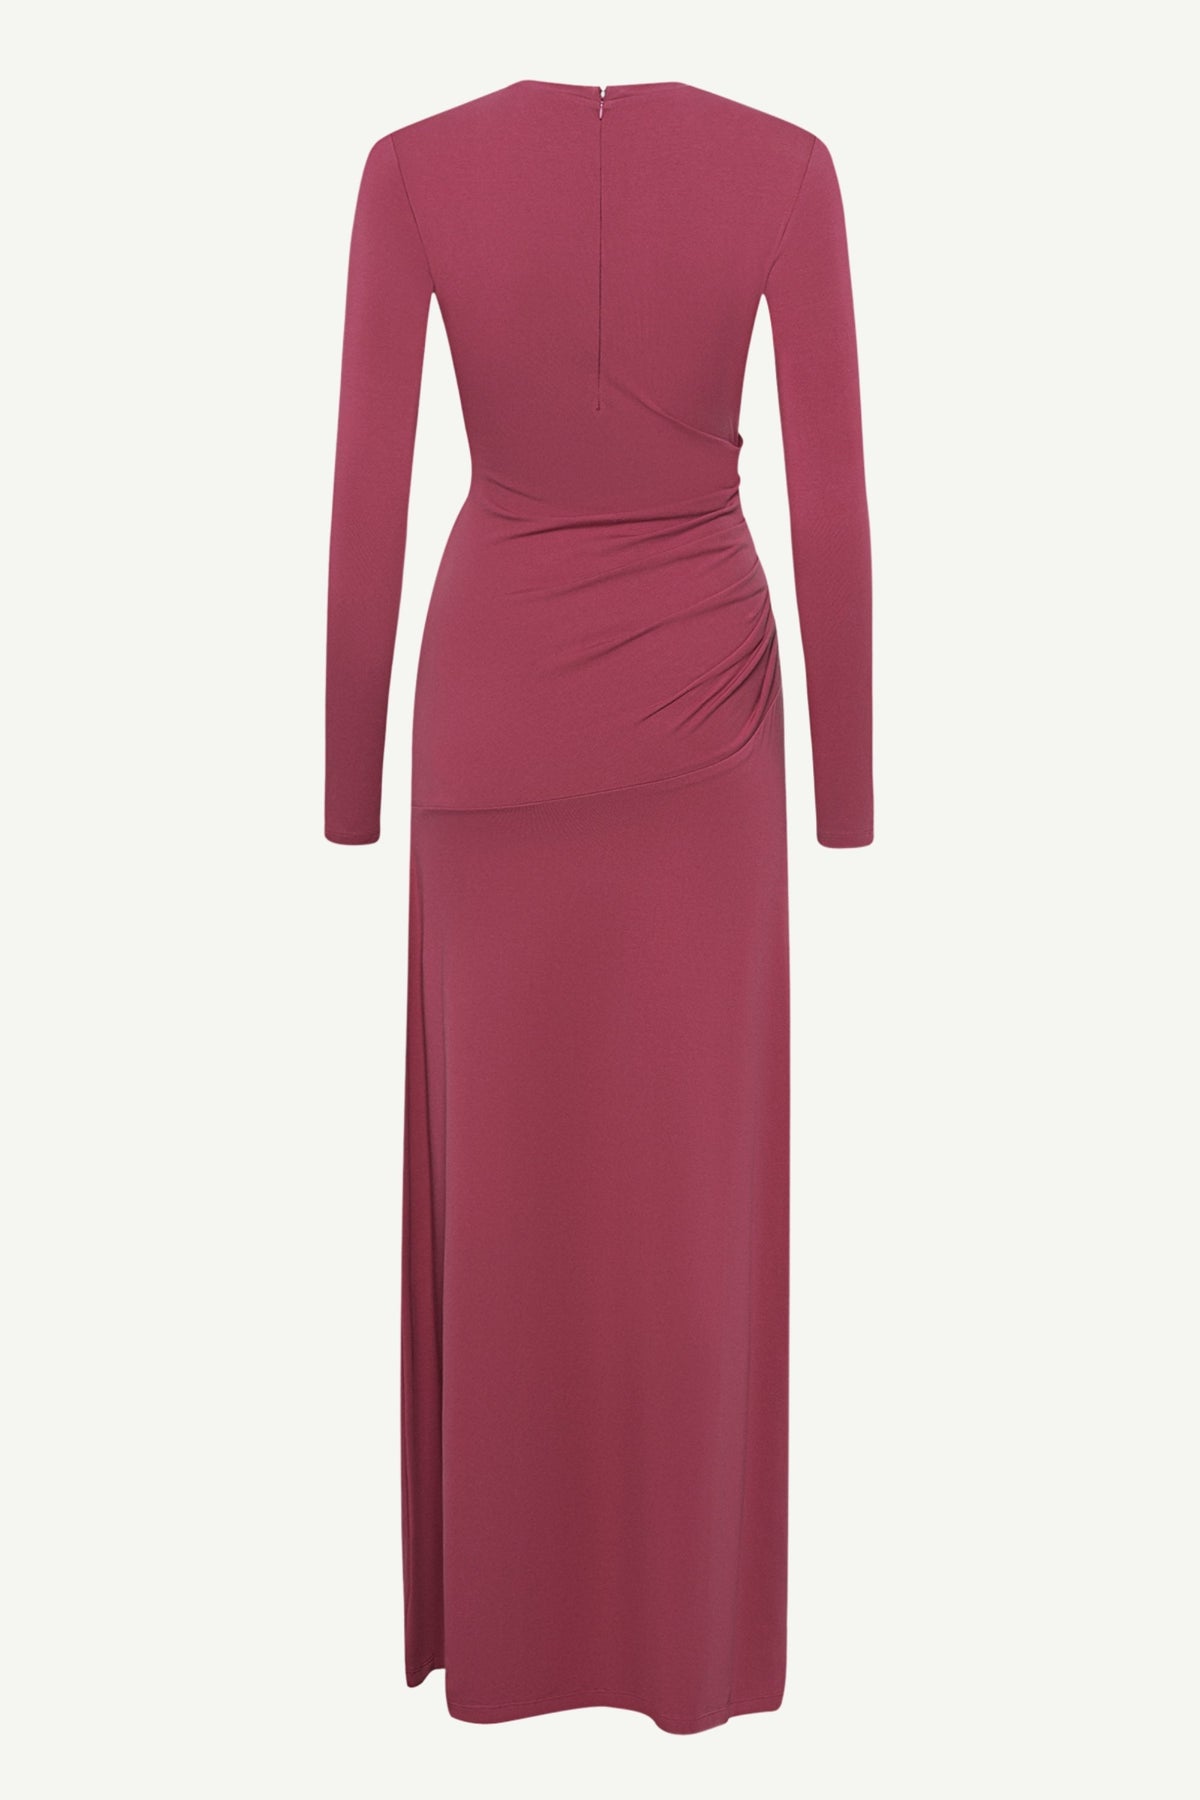 Natalie Rouched Jersey Maxi Dress - Dry Rose Clothing epschoolboard 